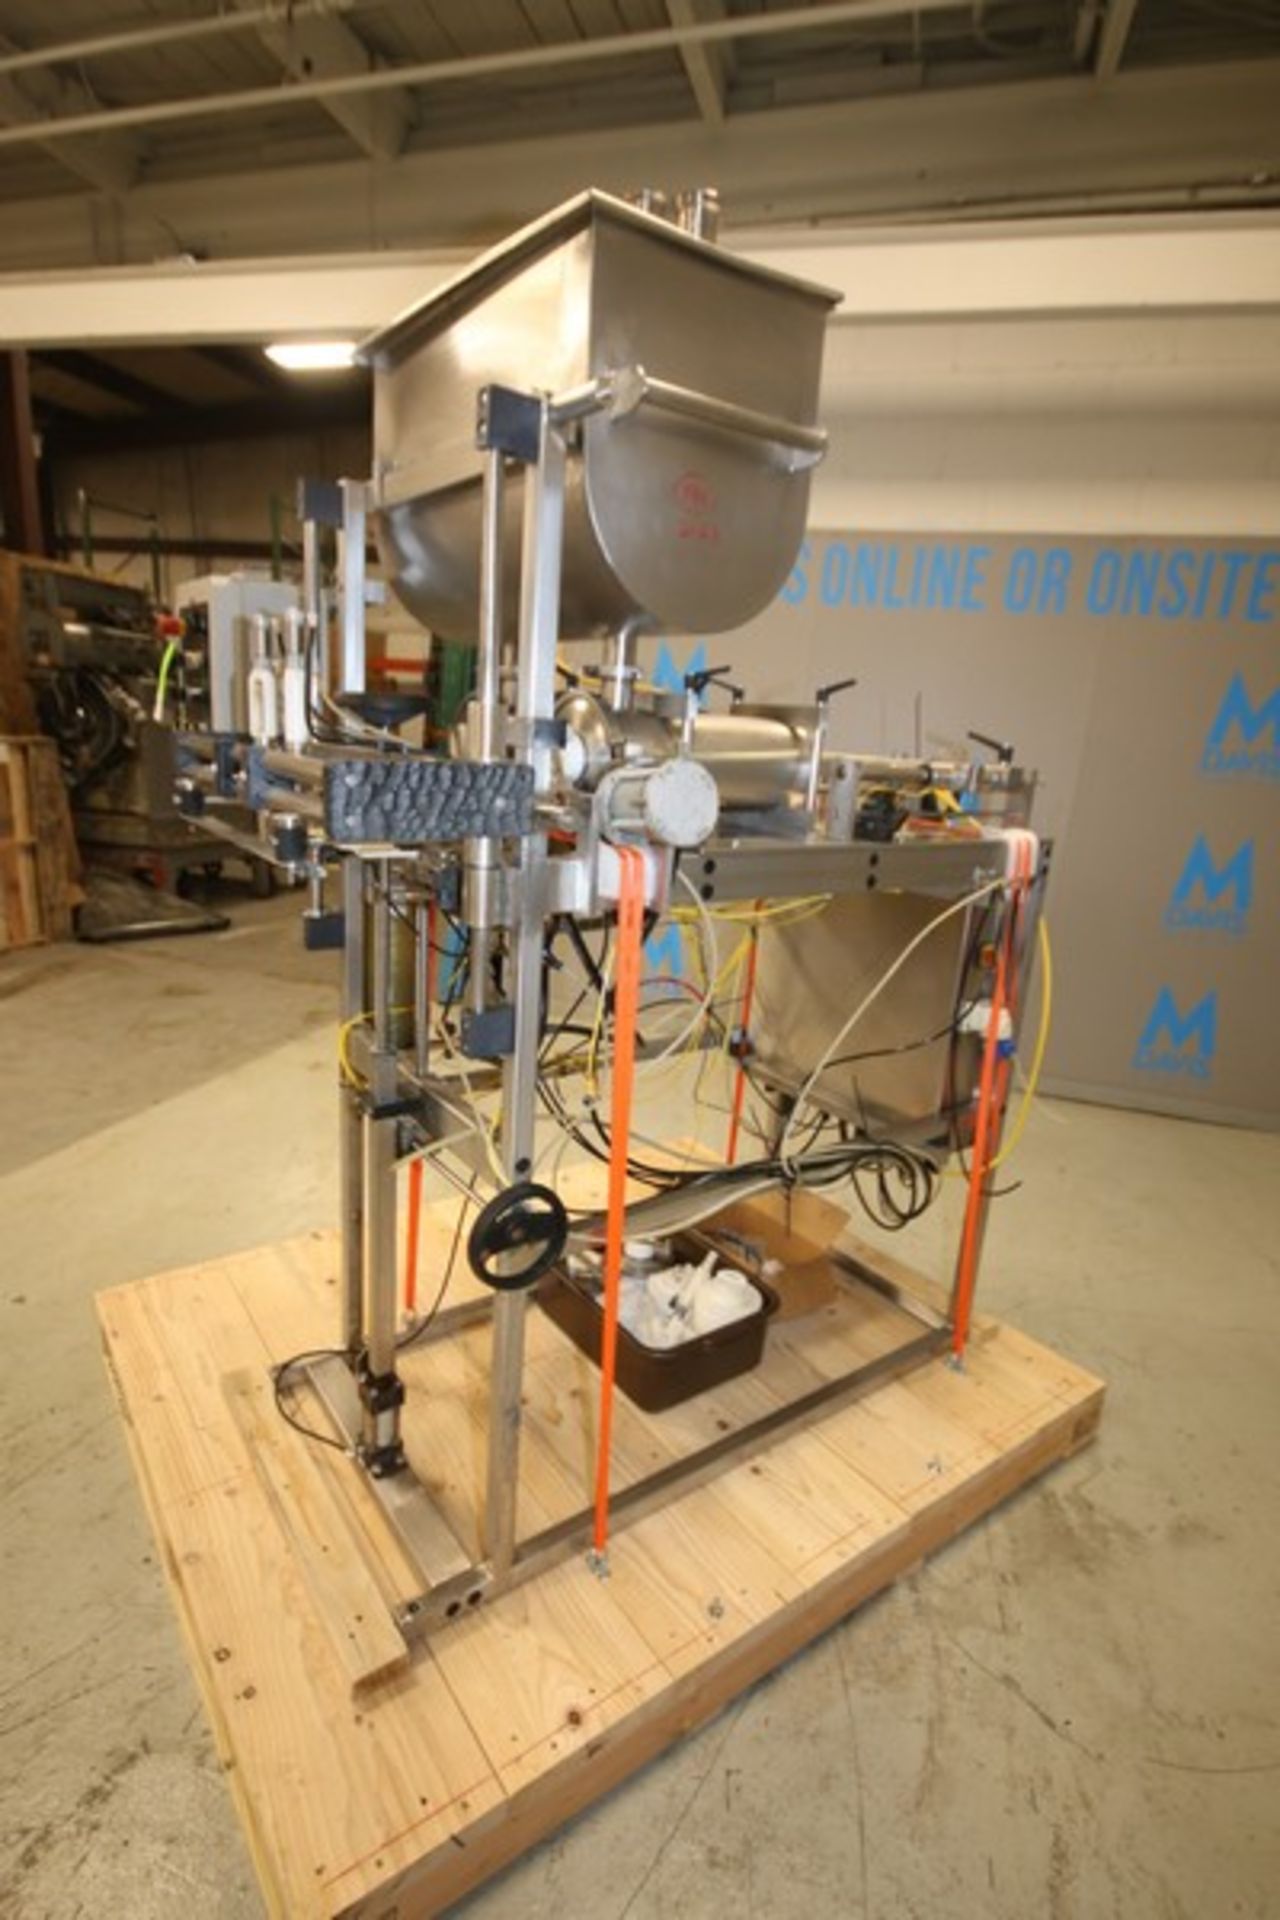 REB Inc. 2-Head S/S Piston Filler, SN IVS-0423, with Filler Bowl with 2" Connections, Control Box - Image 5 of 13